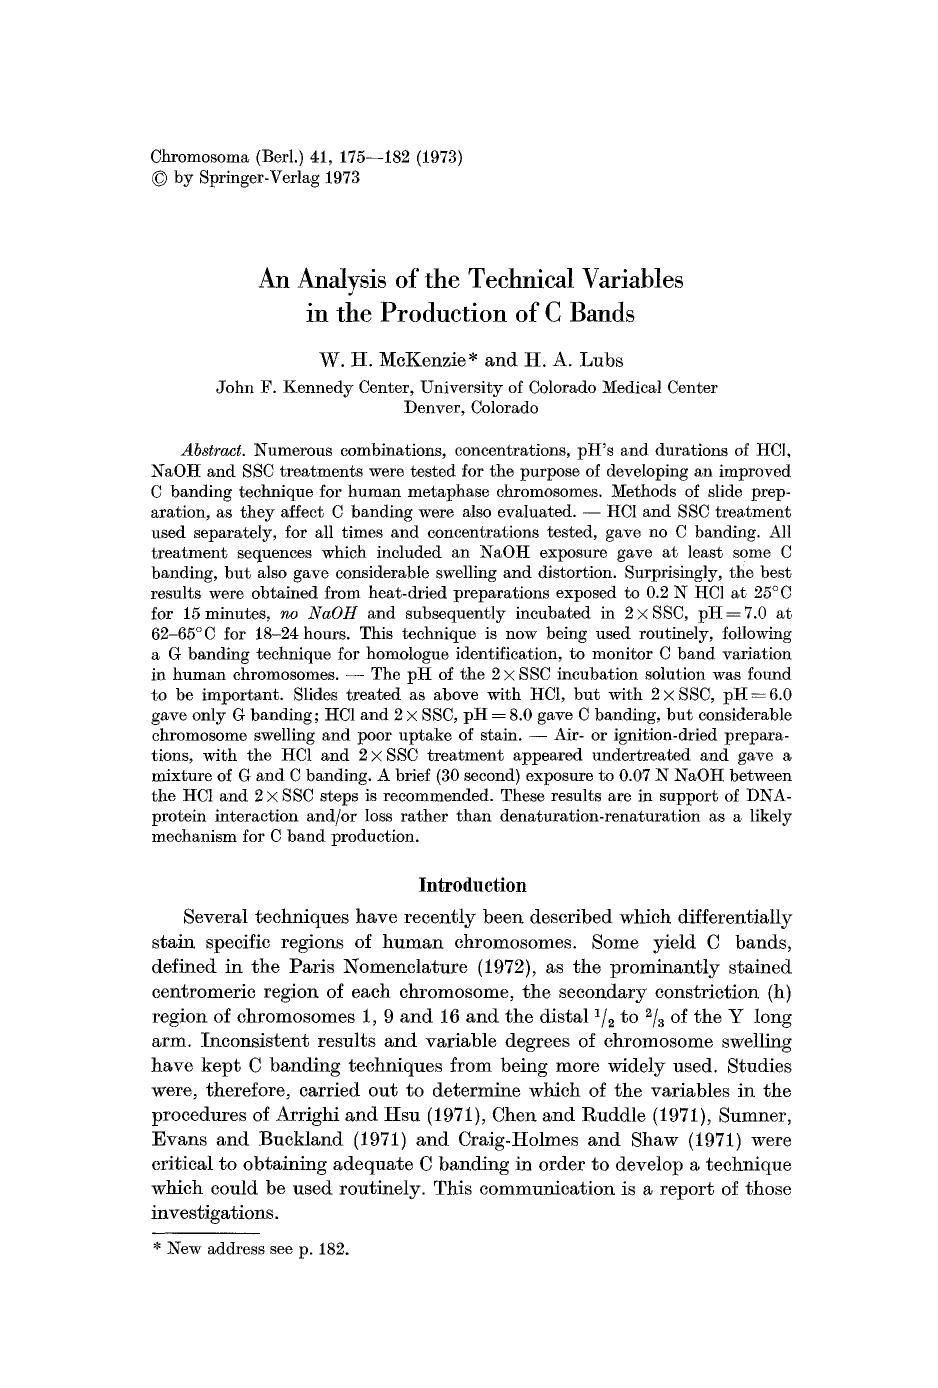 An analysis of the technical variables in the production of C bands by Unknown